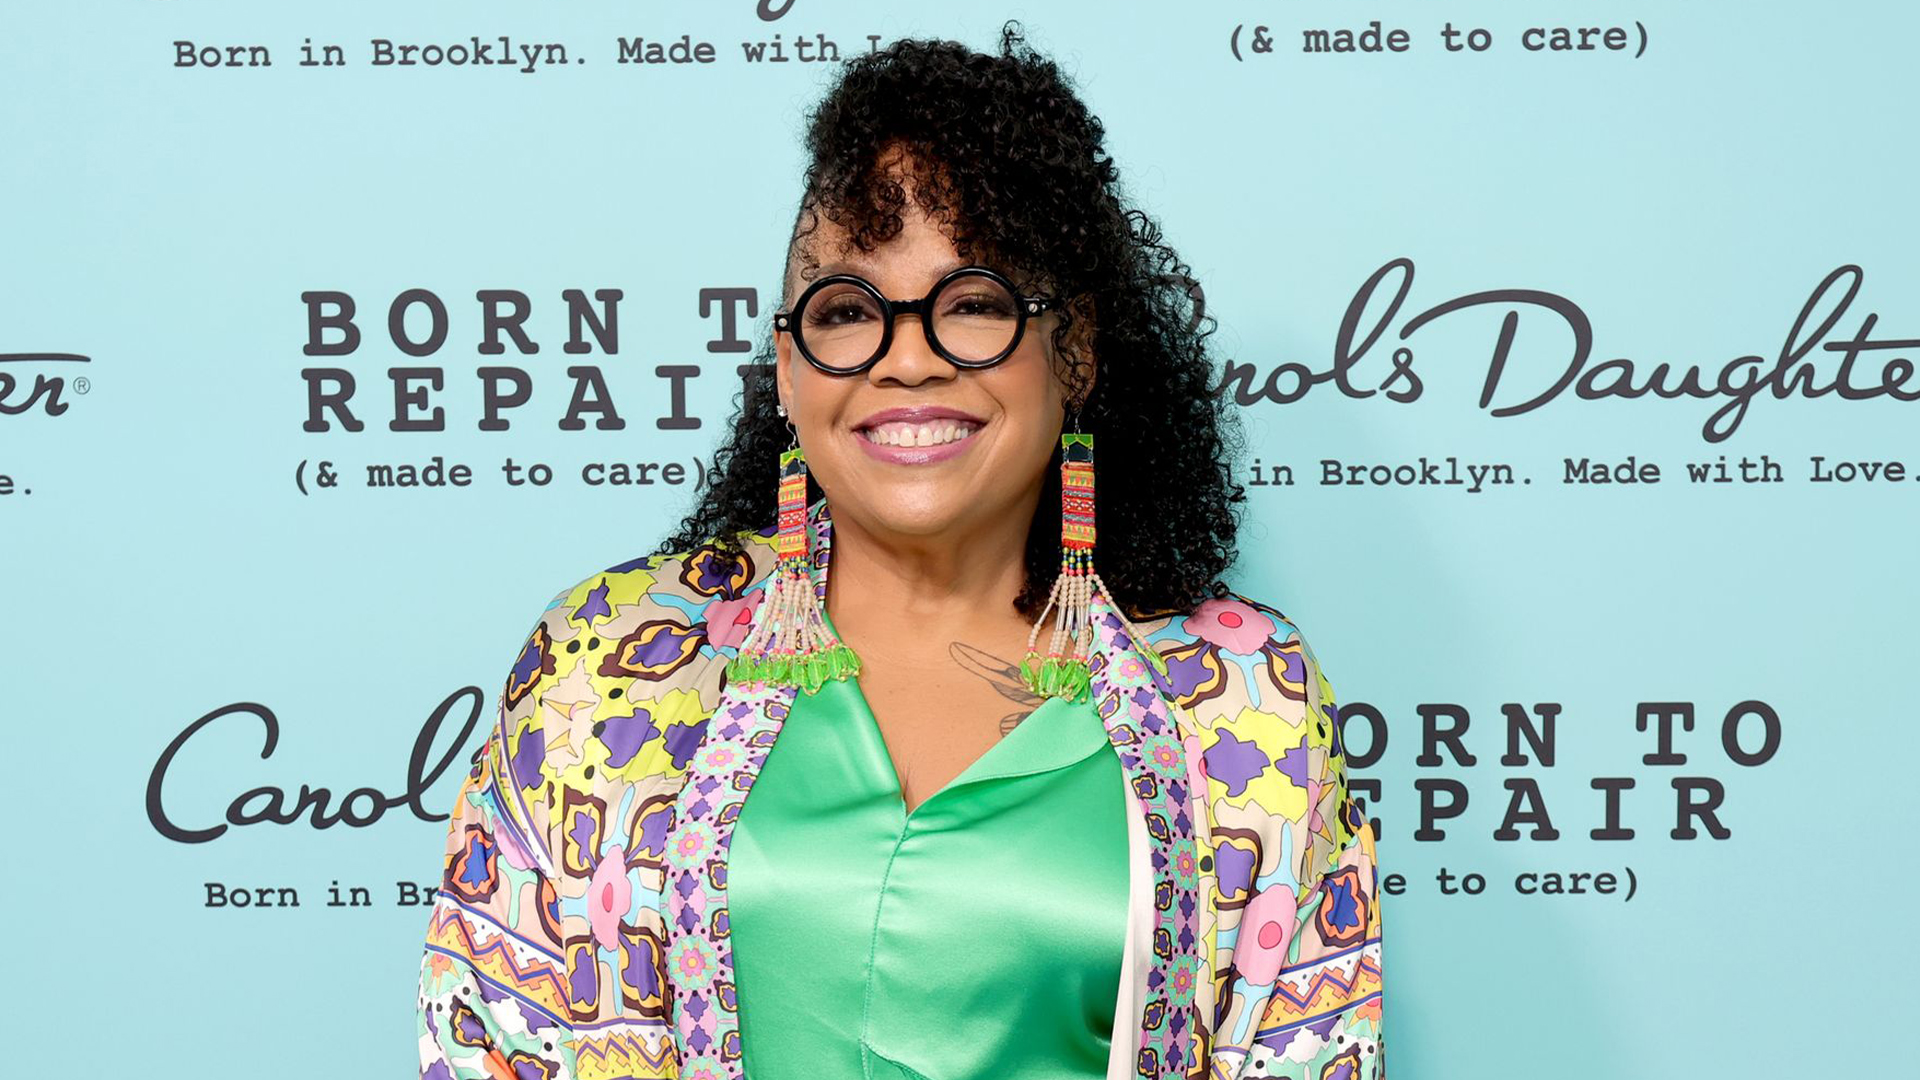 How Carol's Daughter Went From A Brooklyn Kitchen To A Top-Selling Natural Hair Care Brand